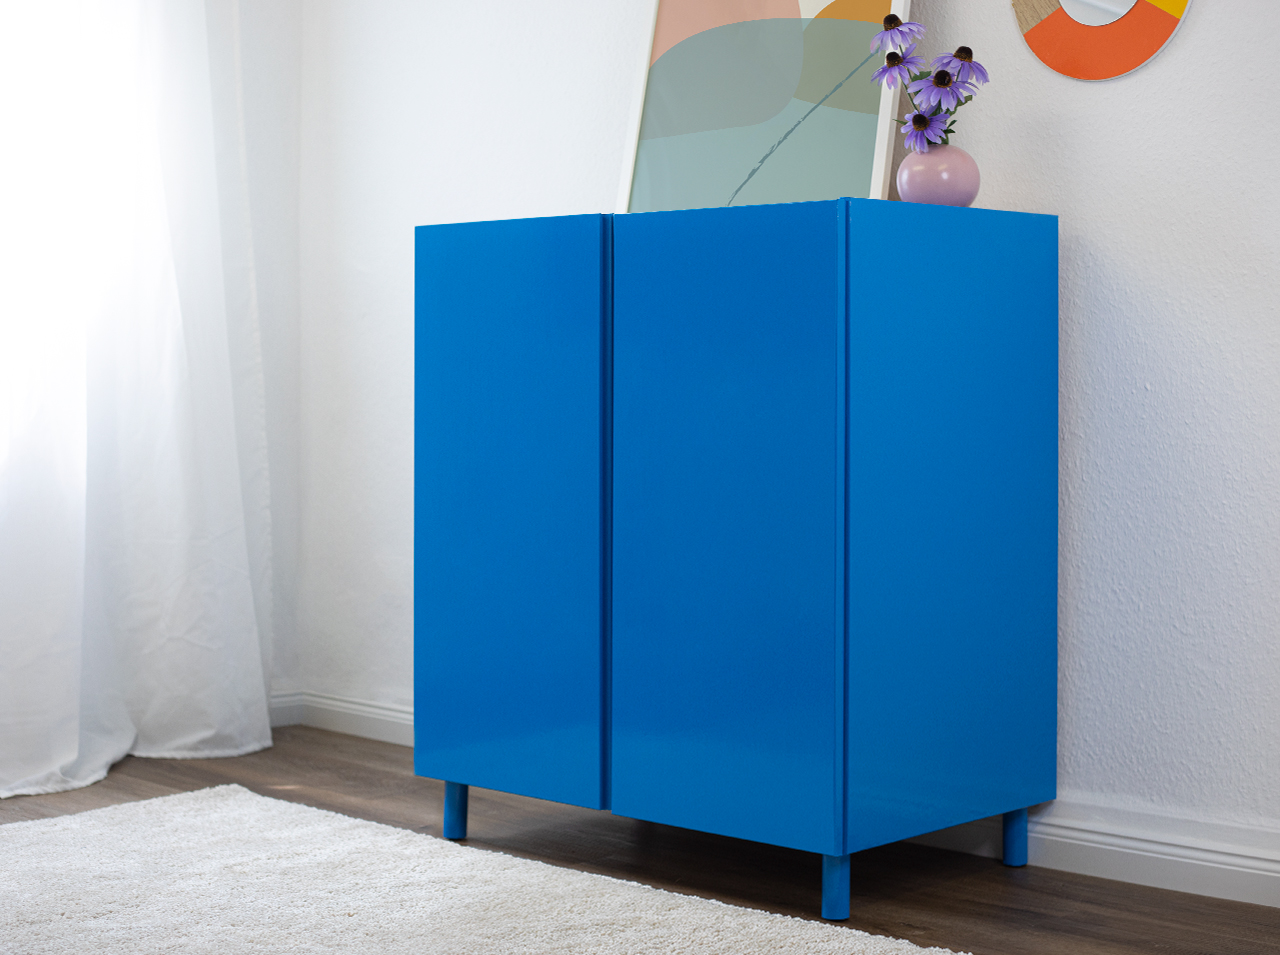 Plain color chest of drawers covered with d-c-fix® Airblue light blue adhesive foil